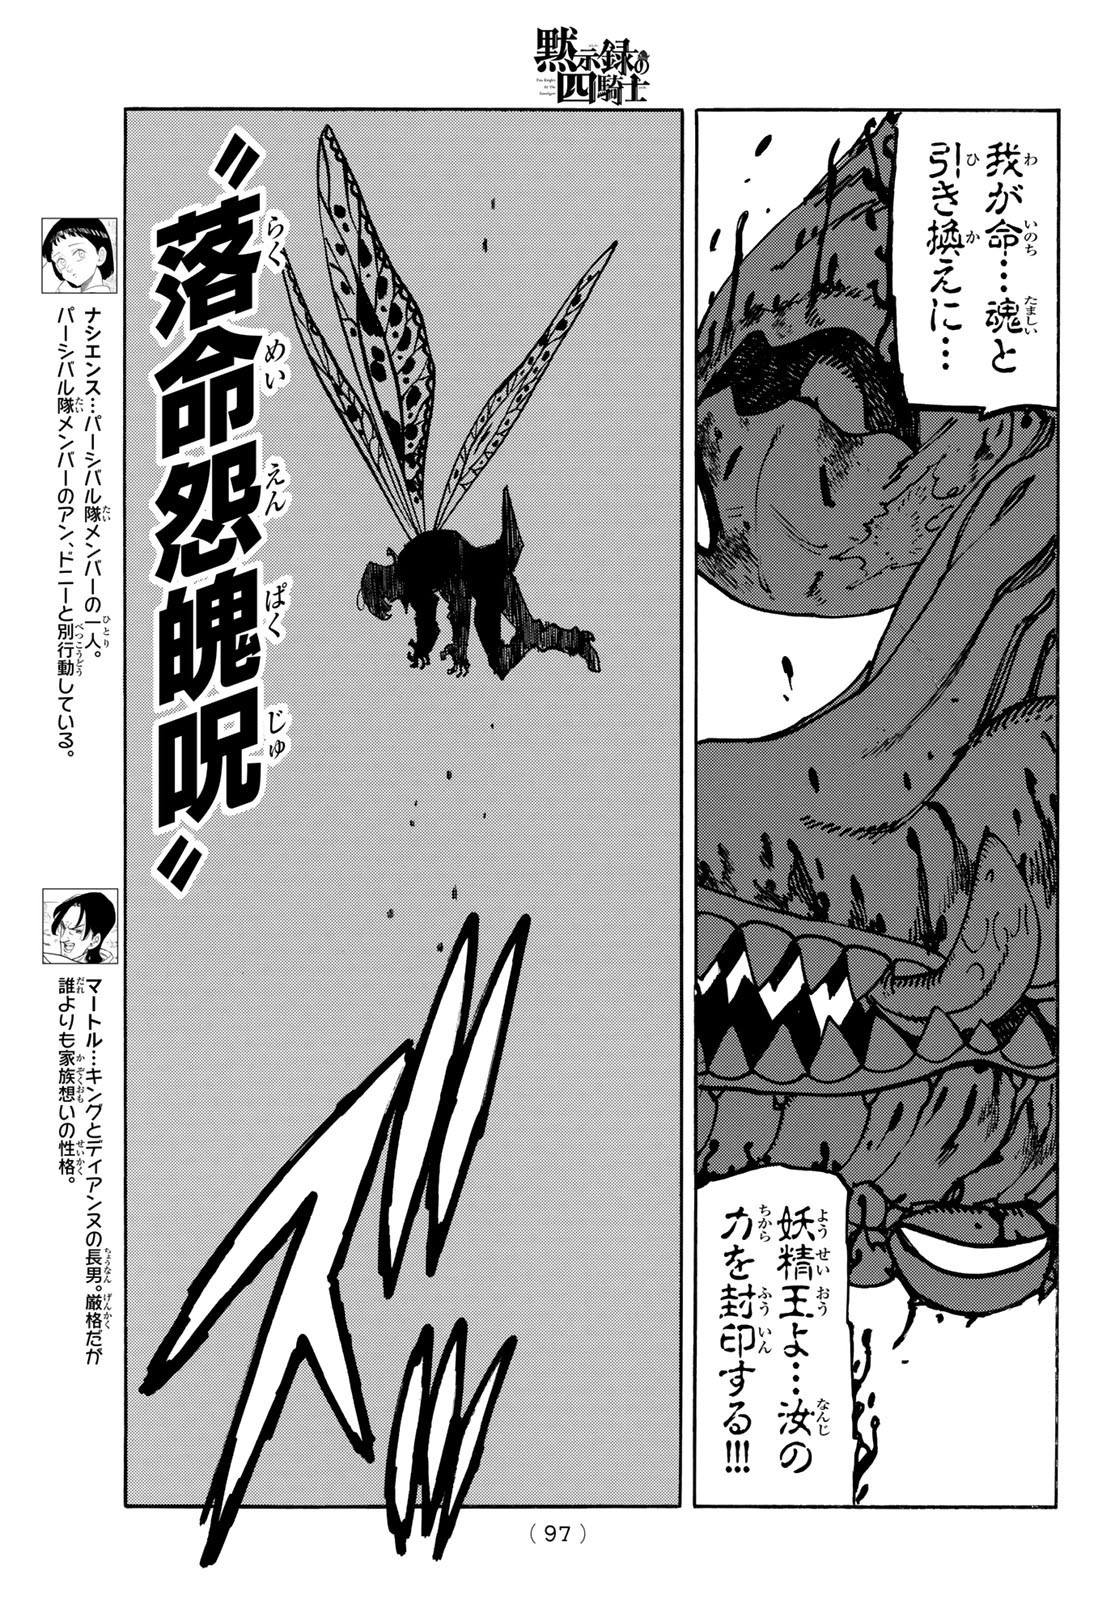 Weekly Shōnen Magazine - 週刊少年マガジン - Chapter 2024-23 - Page 95